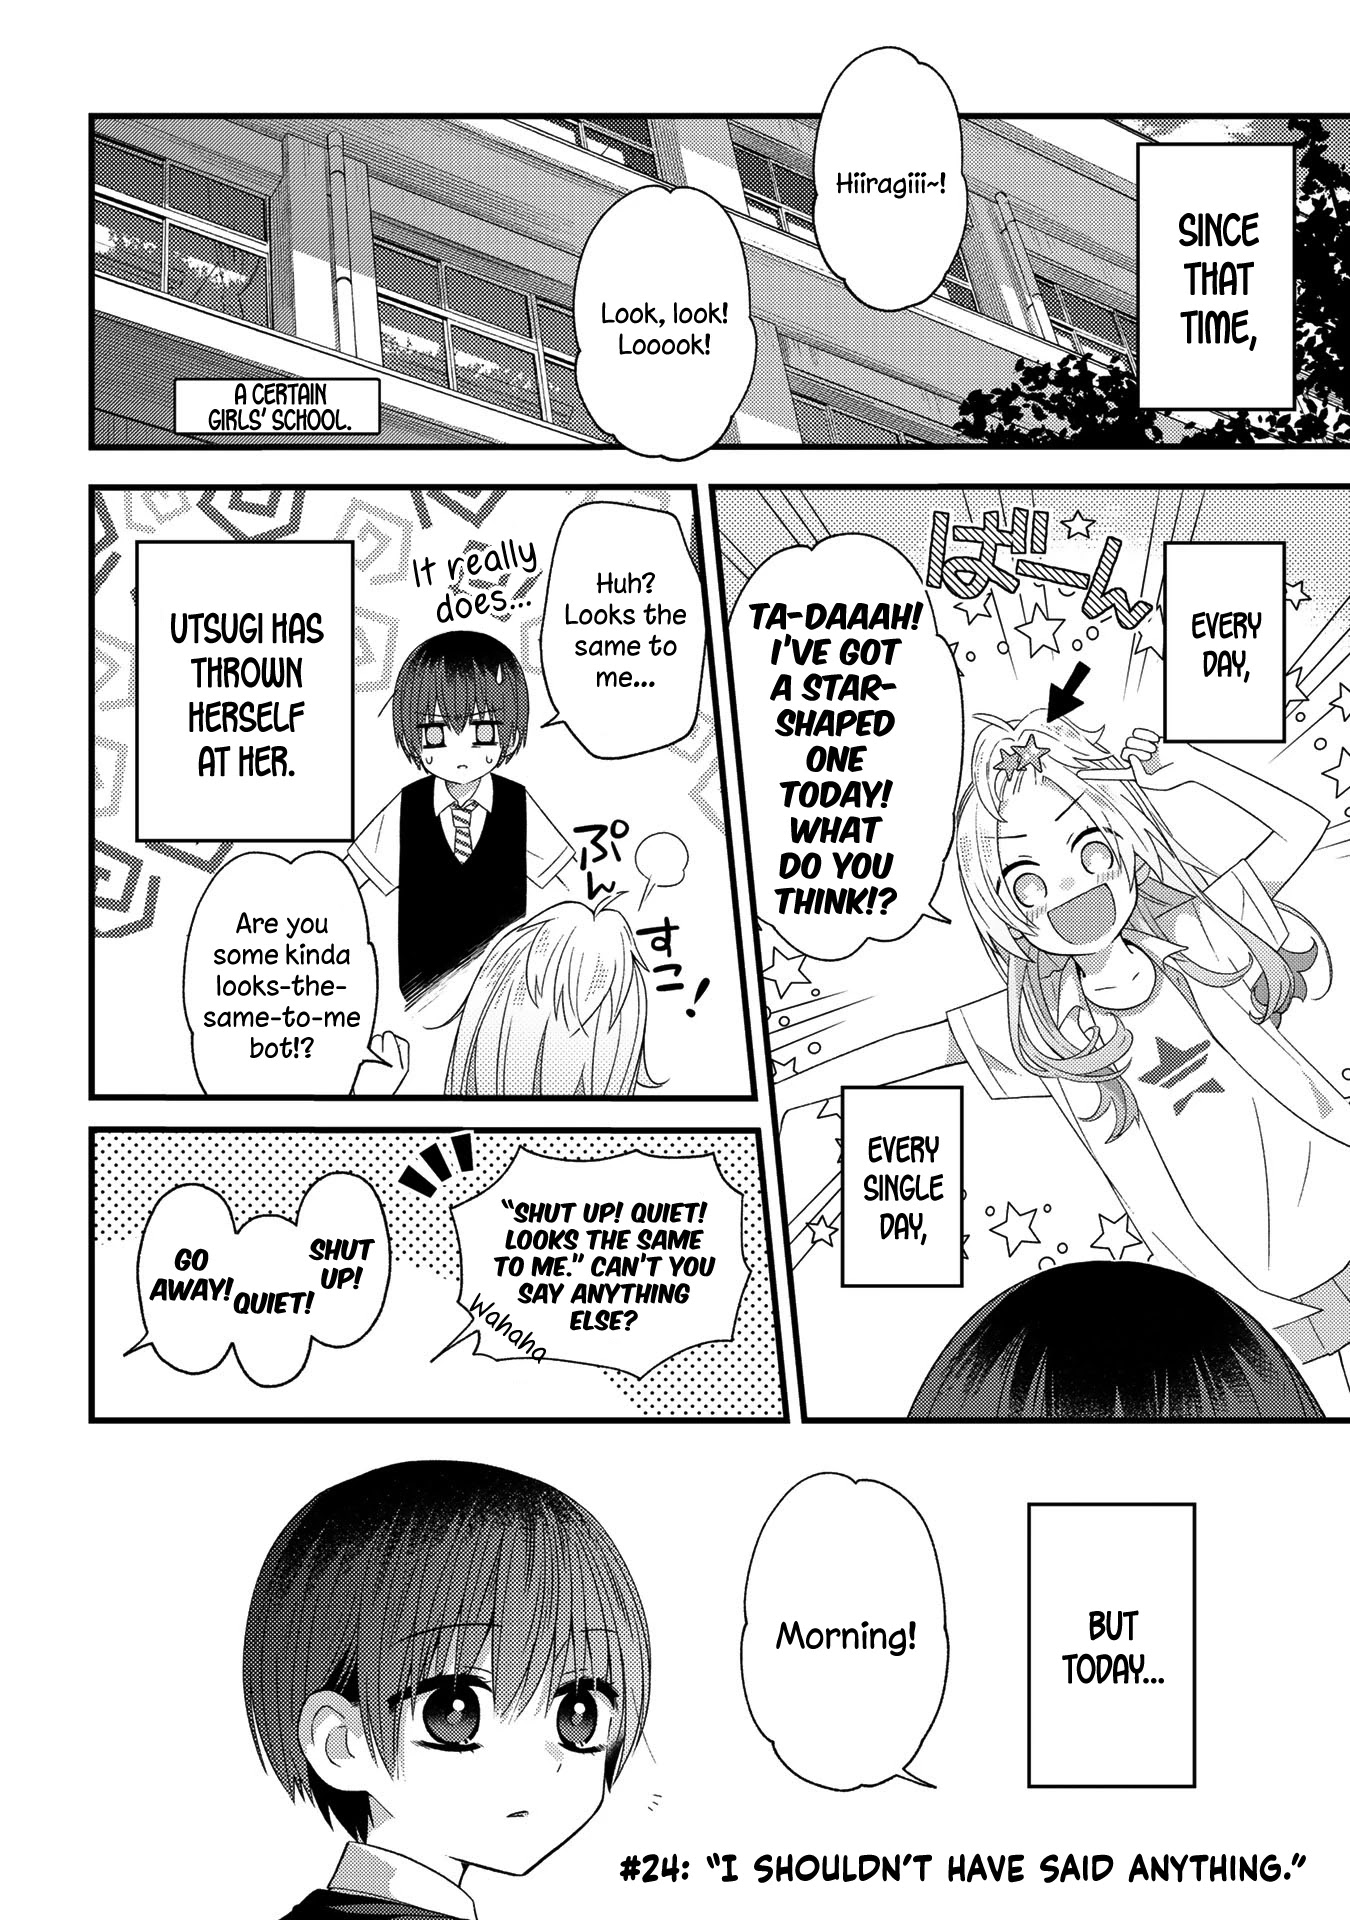 School Zone (Ningiyau) Chapter 24: I Shouldn't Have Said Anything. - Picture 1